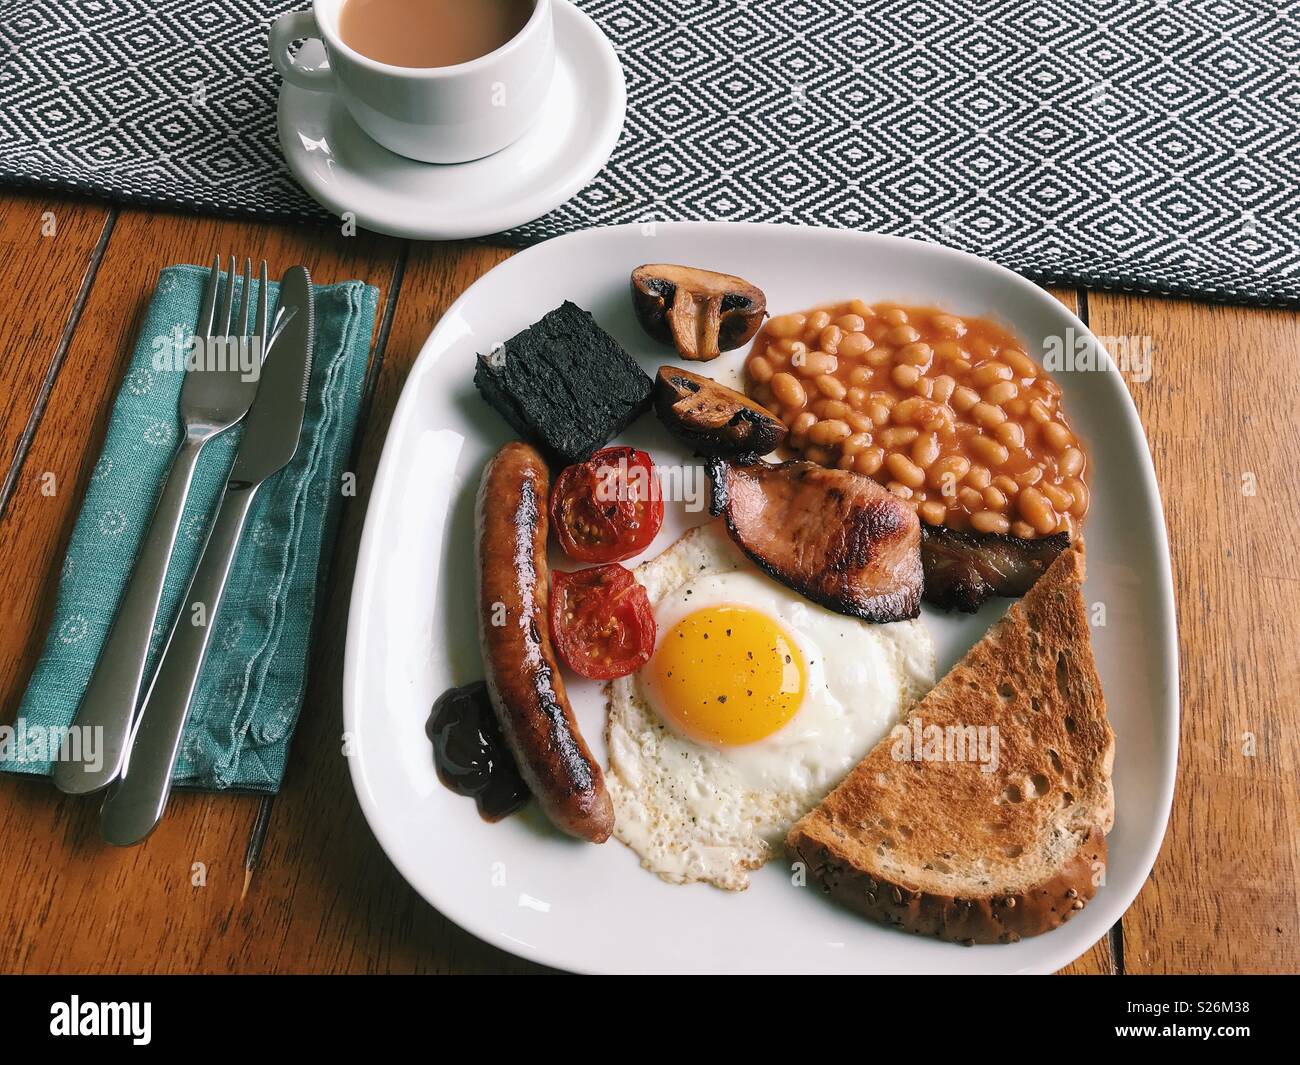 A homemade full English breakfast, with sausage, tomatoes, black pudding, mushrooms, baked beans, toast, brown sauce, a fried egg, and a cup of tea. Stock Photo